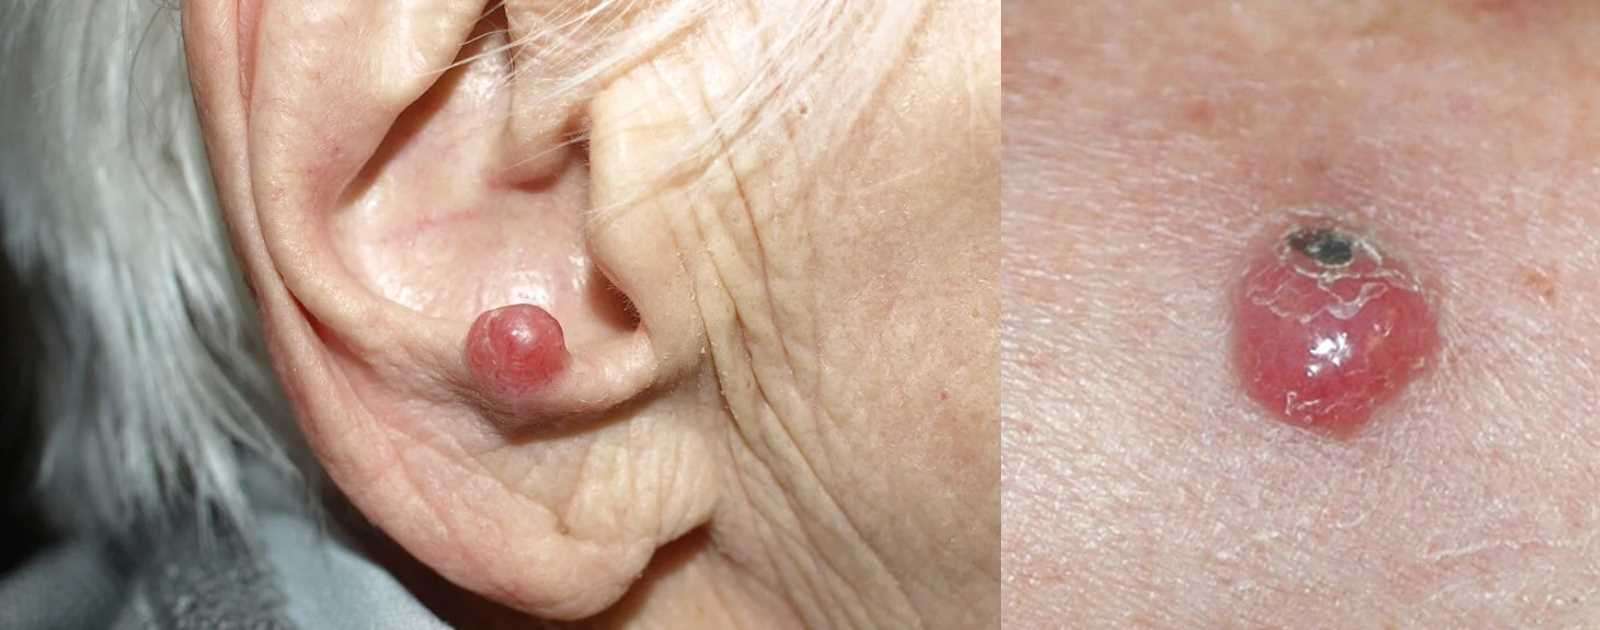 Merkel Cell Skin Cancer: Symptoms and Causes